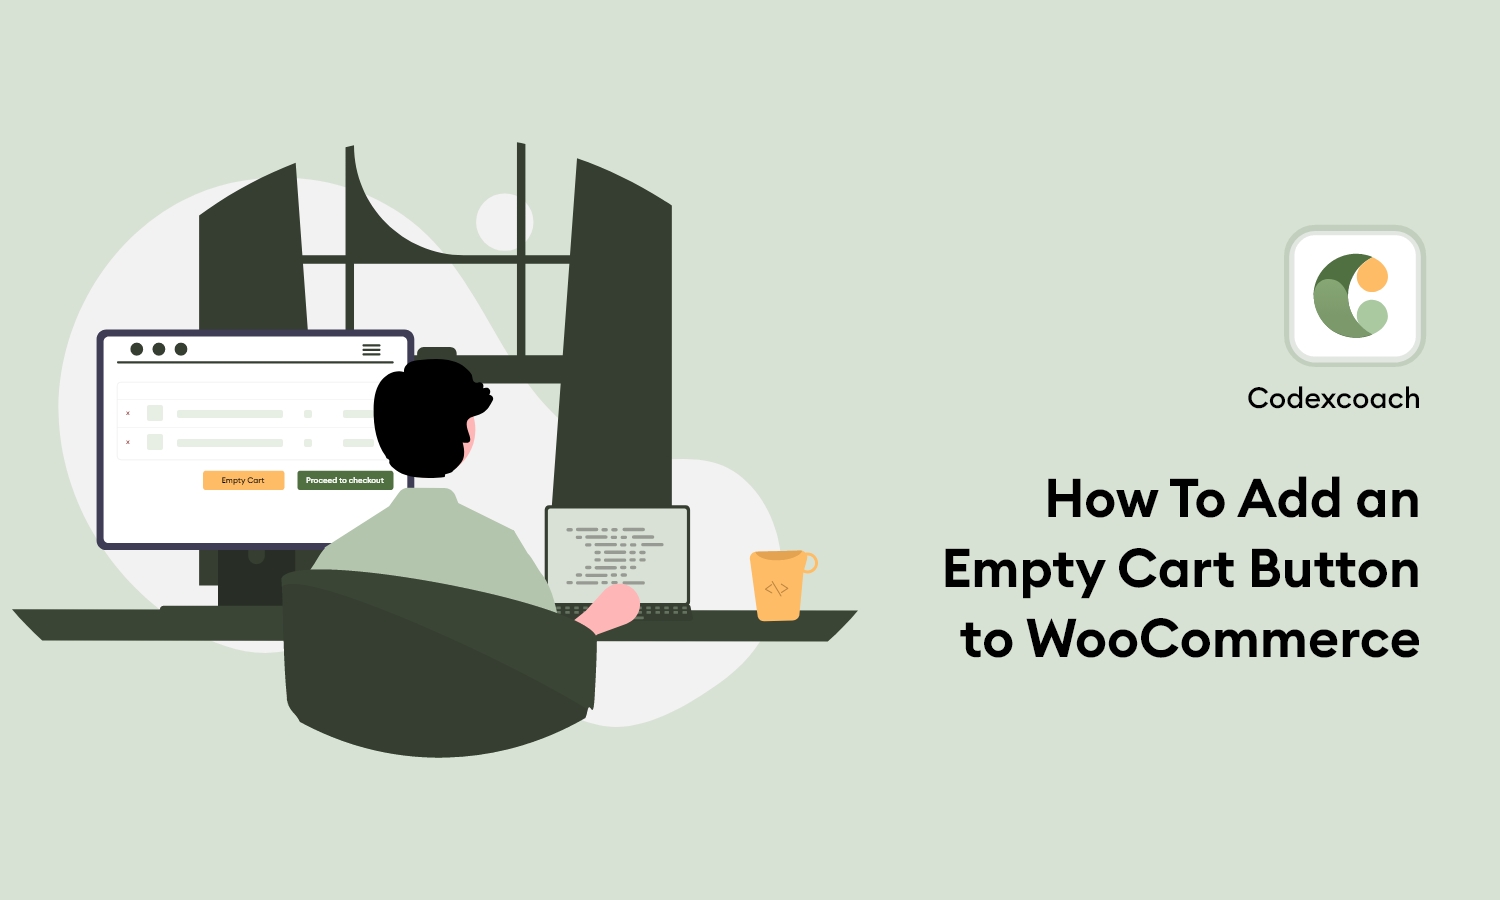 How To Add an Empty Cart Button to WooCommerce